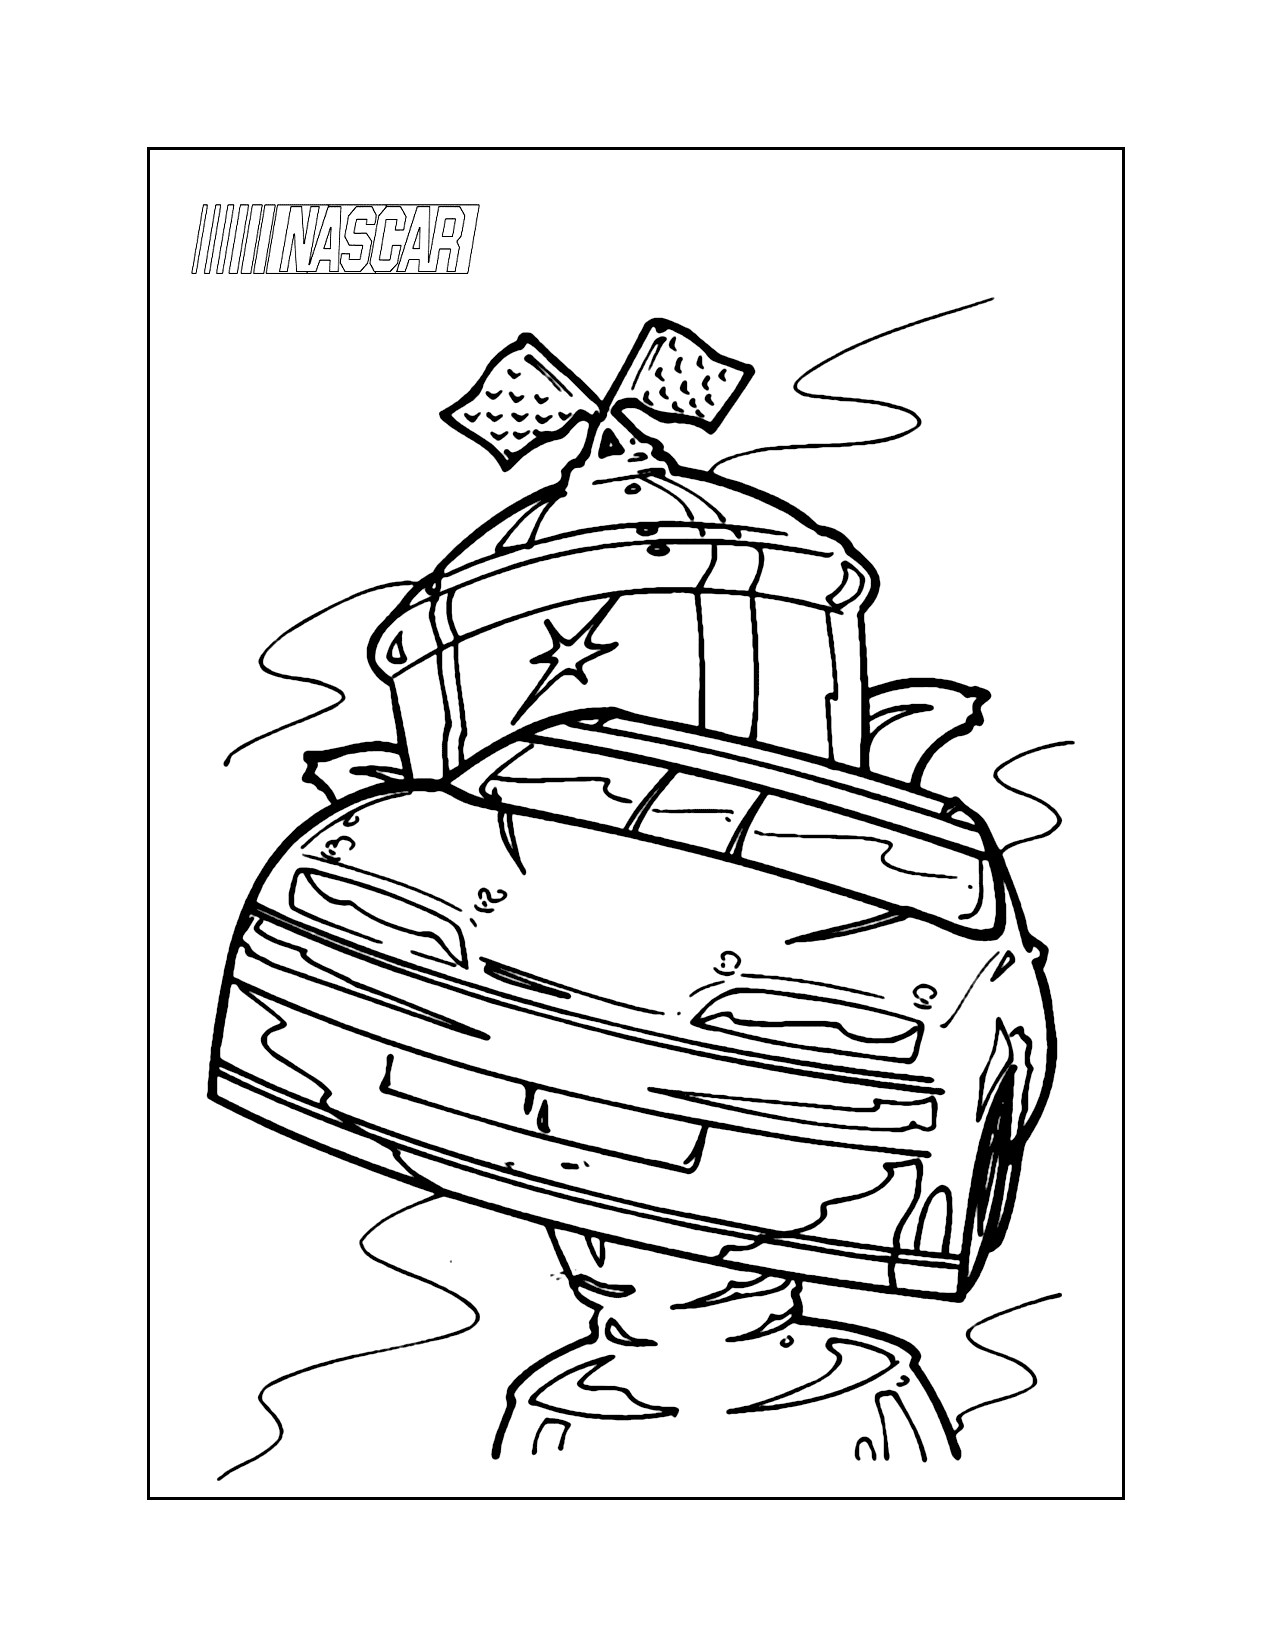 Nascar Cup Coloring Page